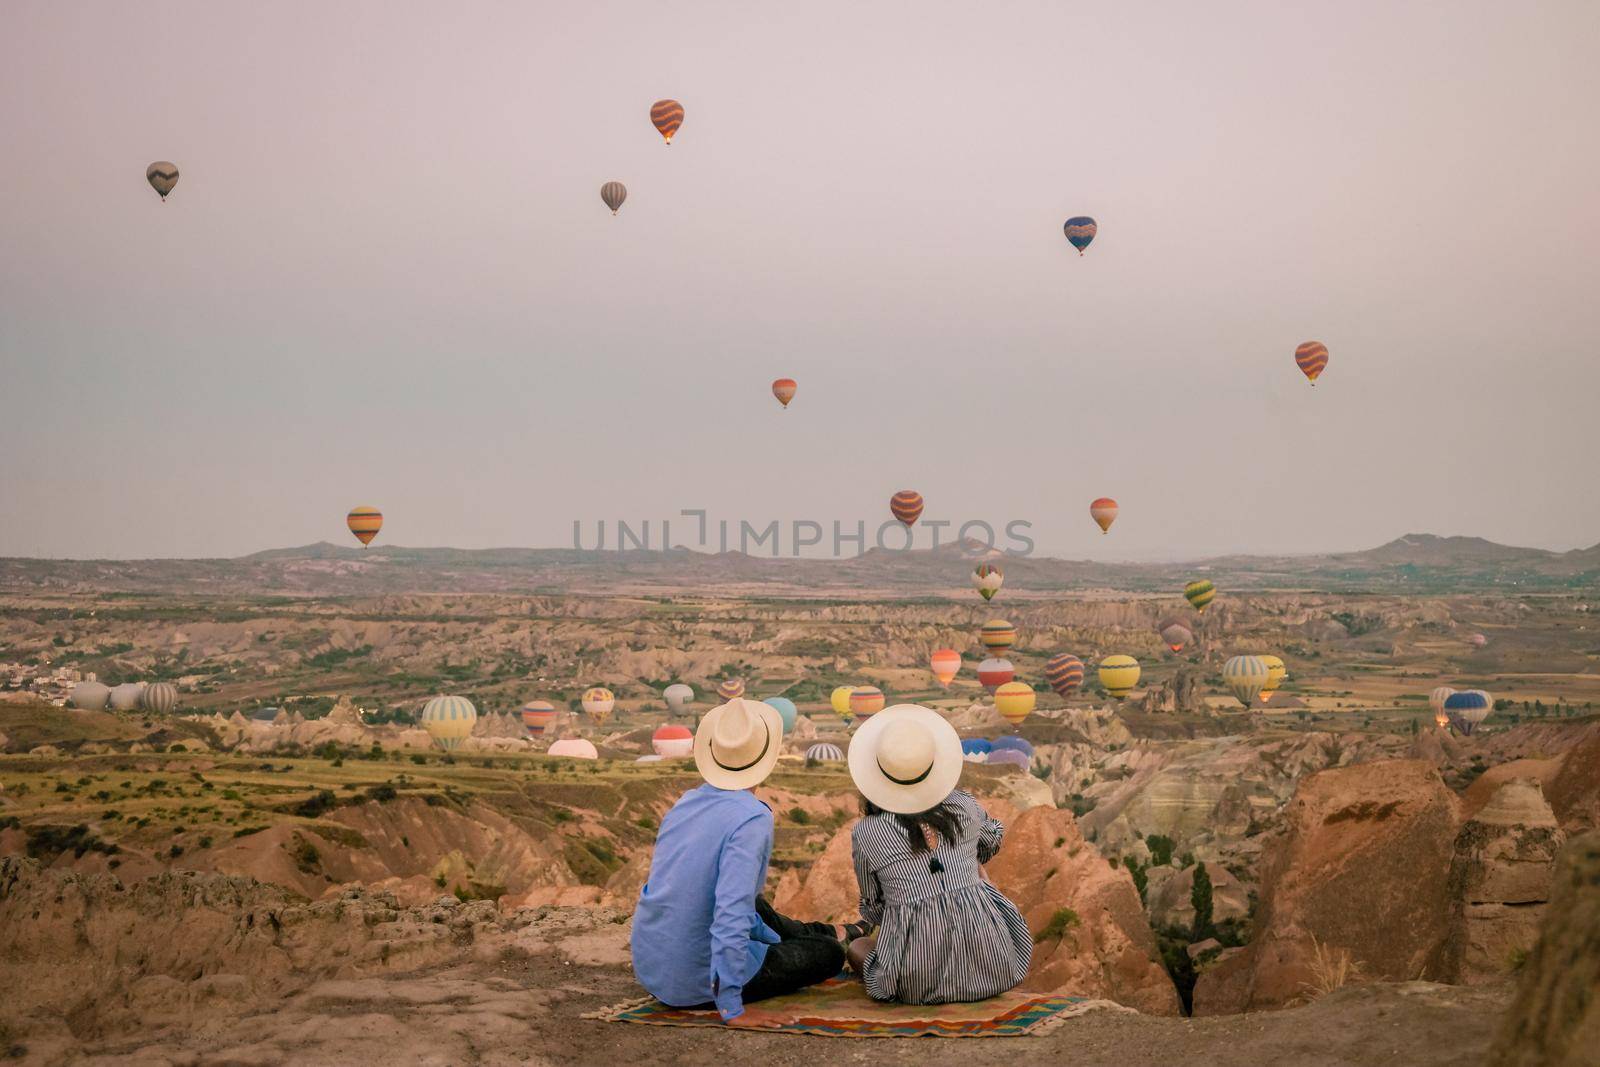 Kapadokya Cappadocia Turkey, a happy young couple during sunrise watching the hot air balloons of Kapadokya Cappadocia Turkey during vacation. Asian women and caucasian men on holiday in Turkey